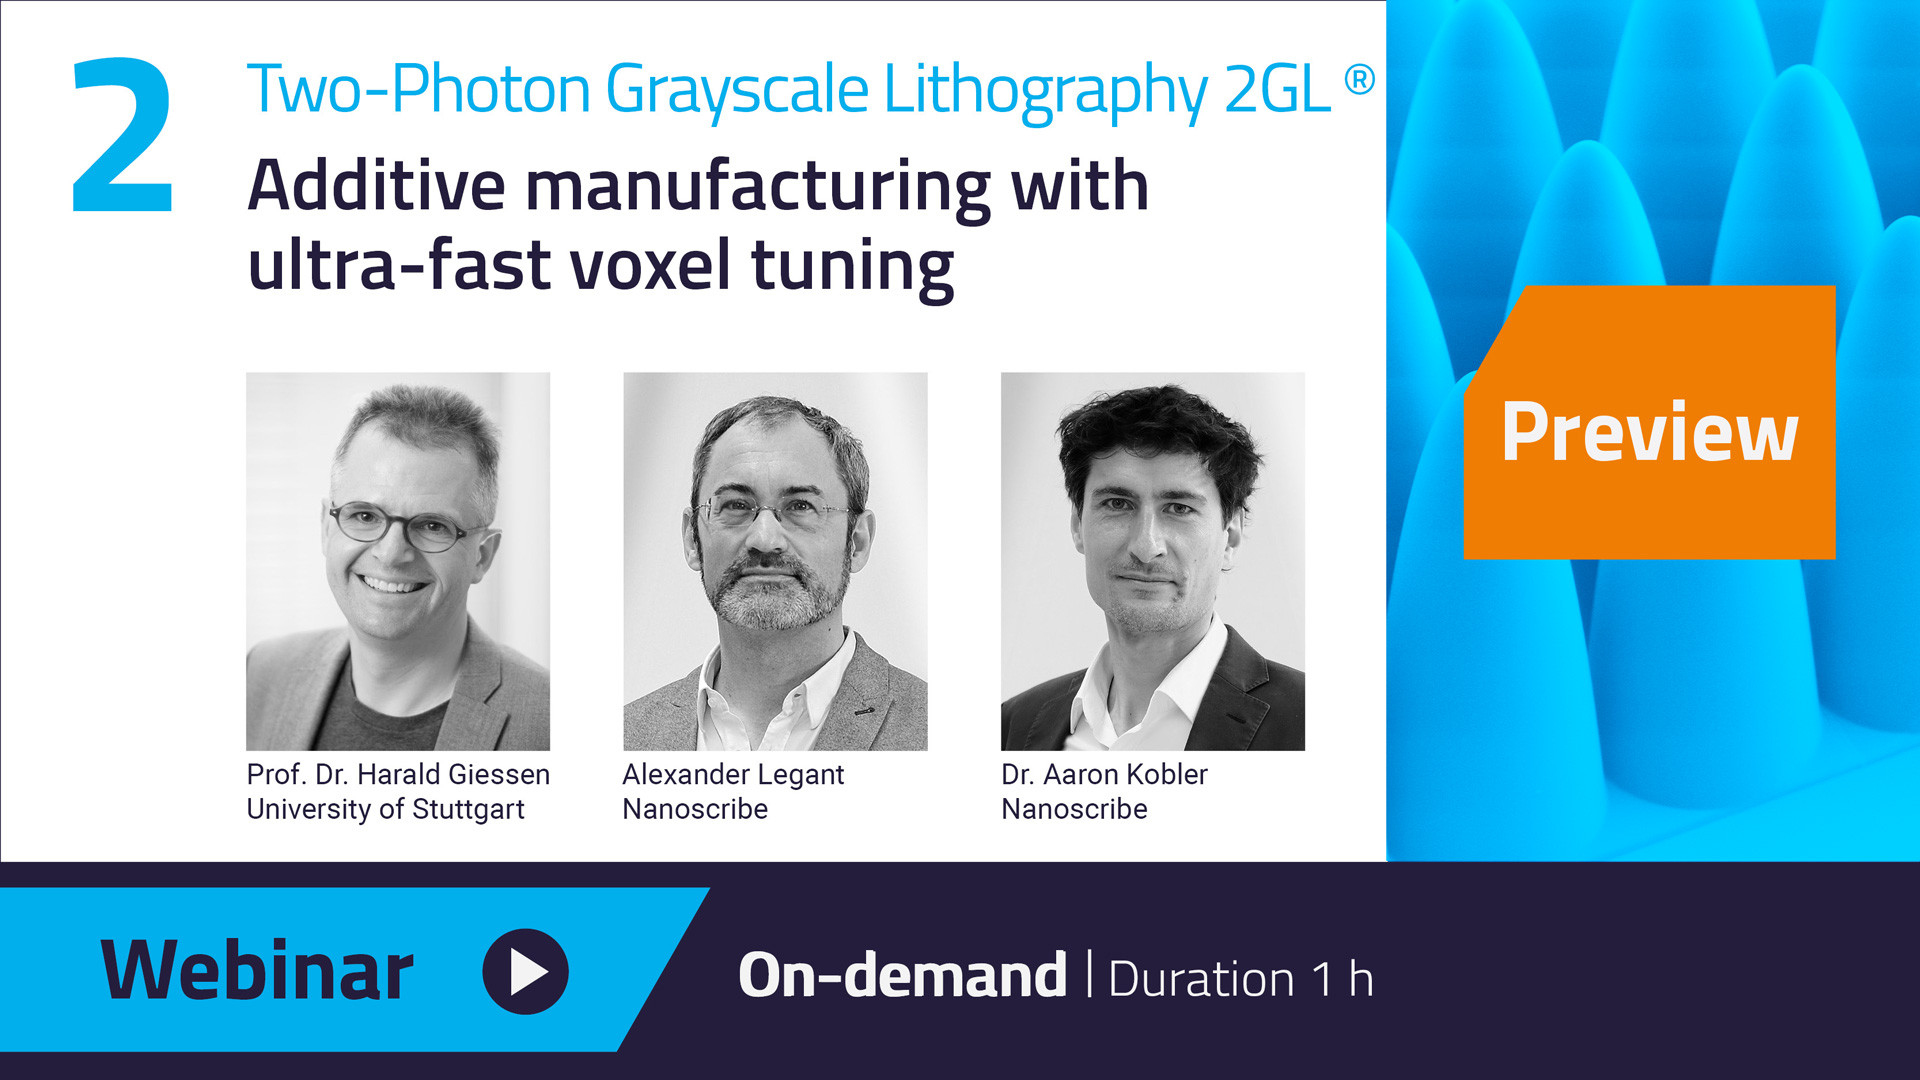 Our Webinar on 2GL is now available on-demand - watch the webinar here